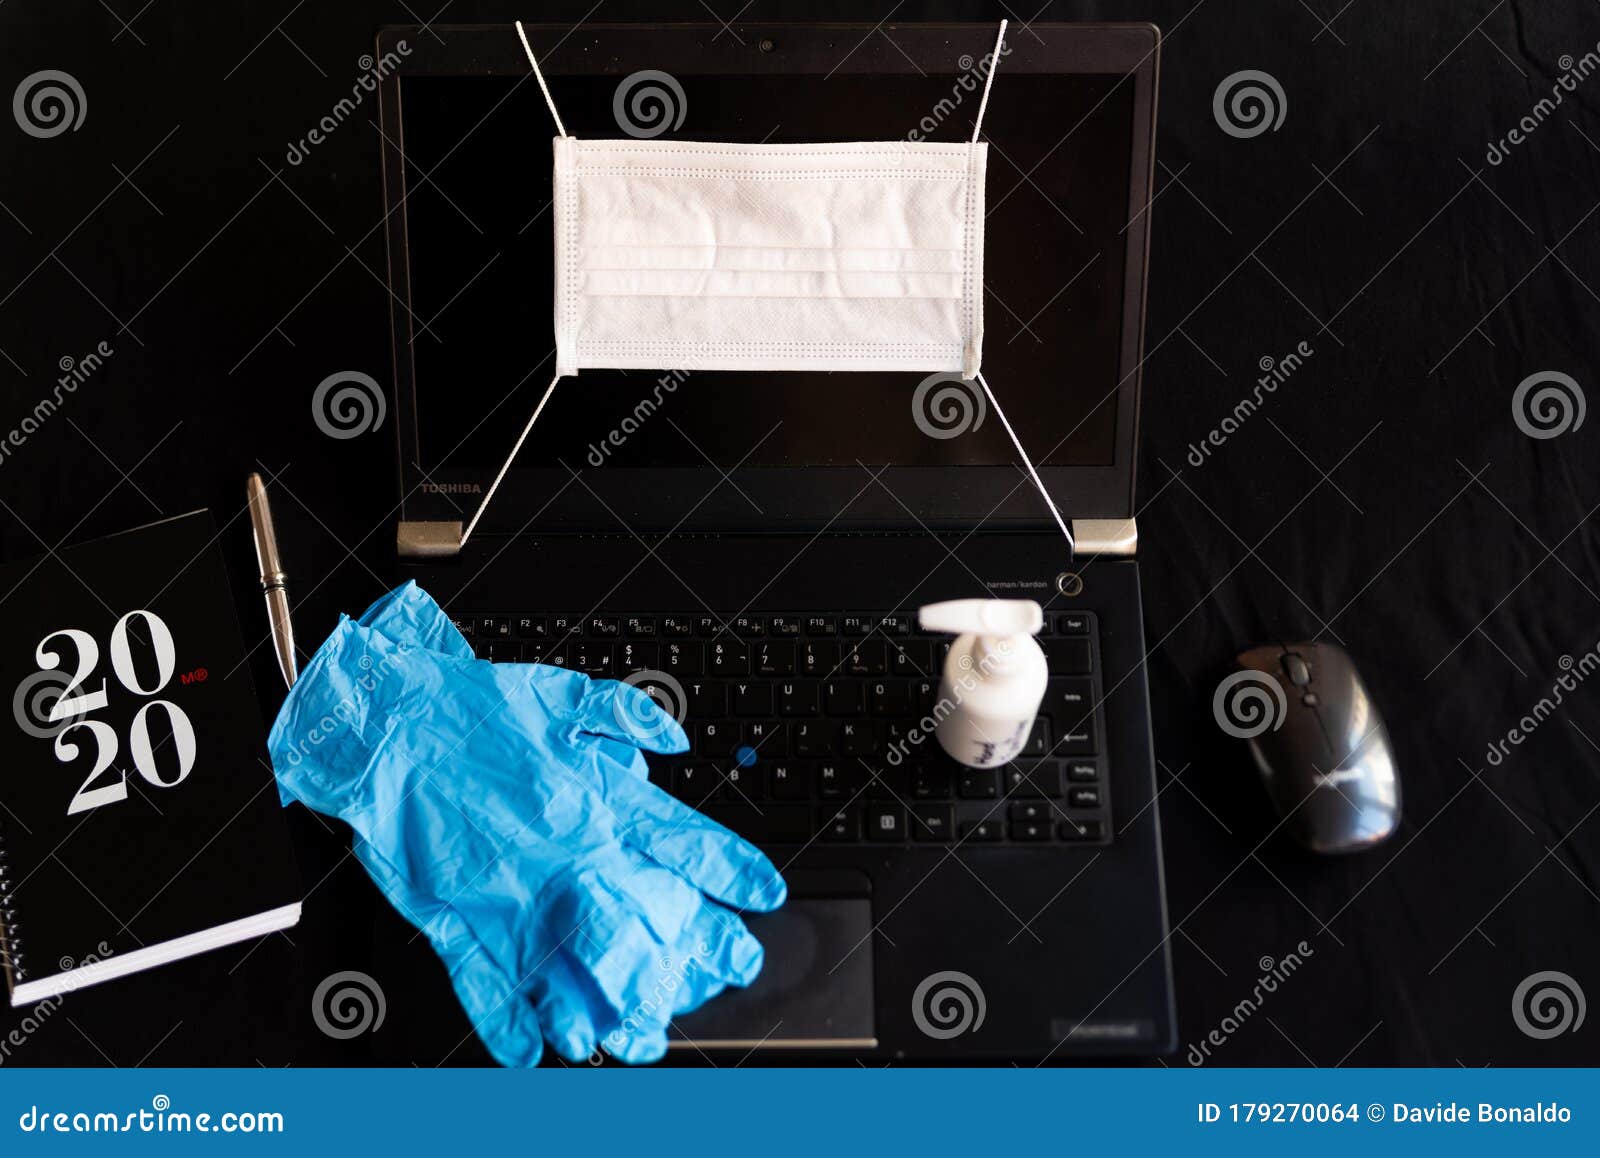 remote work kit on black background home office desk with hand sanitizer and face mask, against the spread of corona virus for